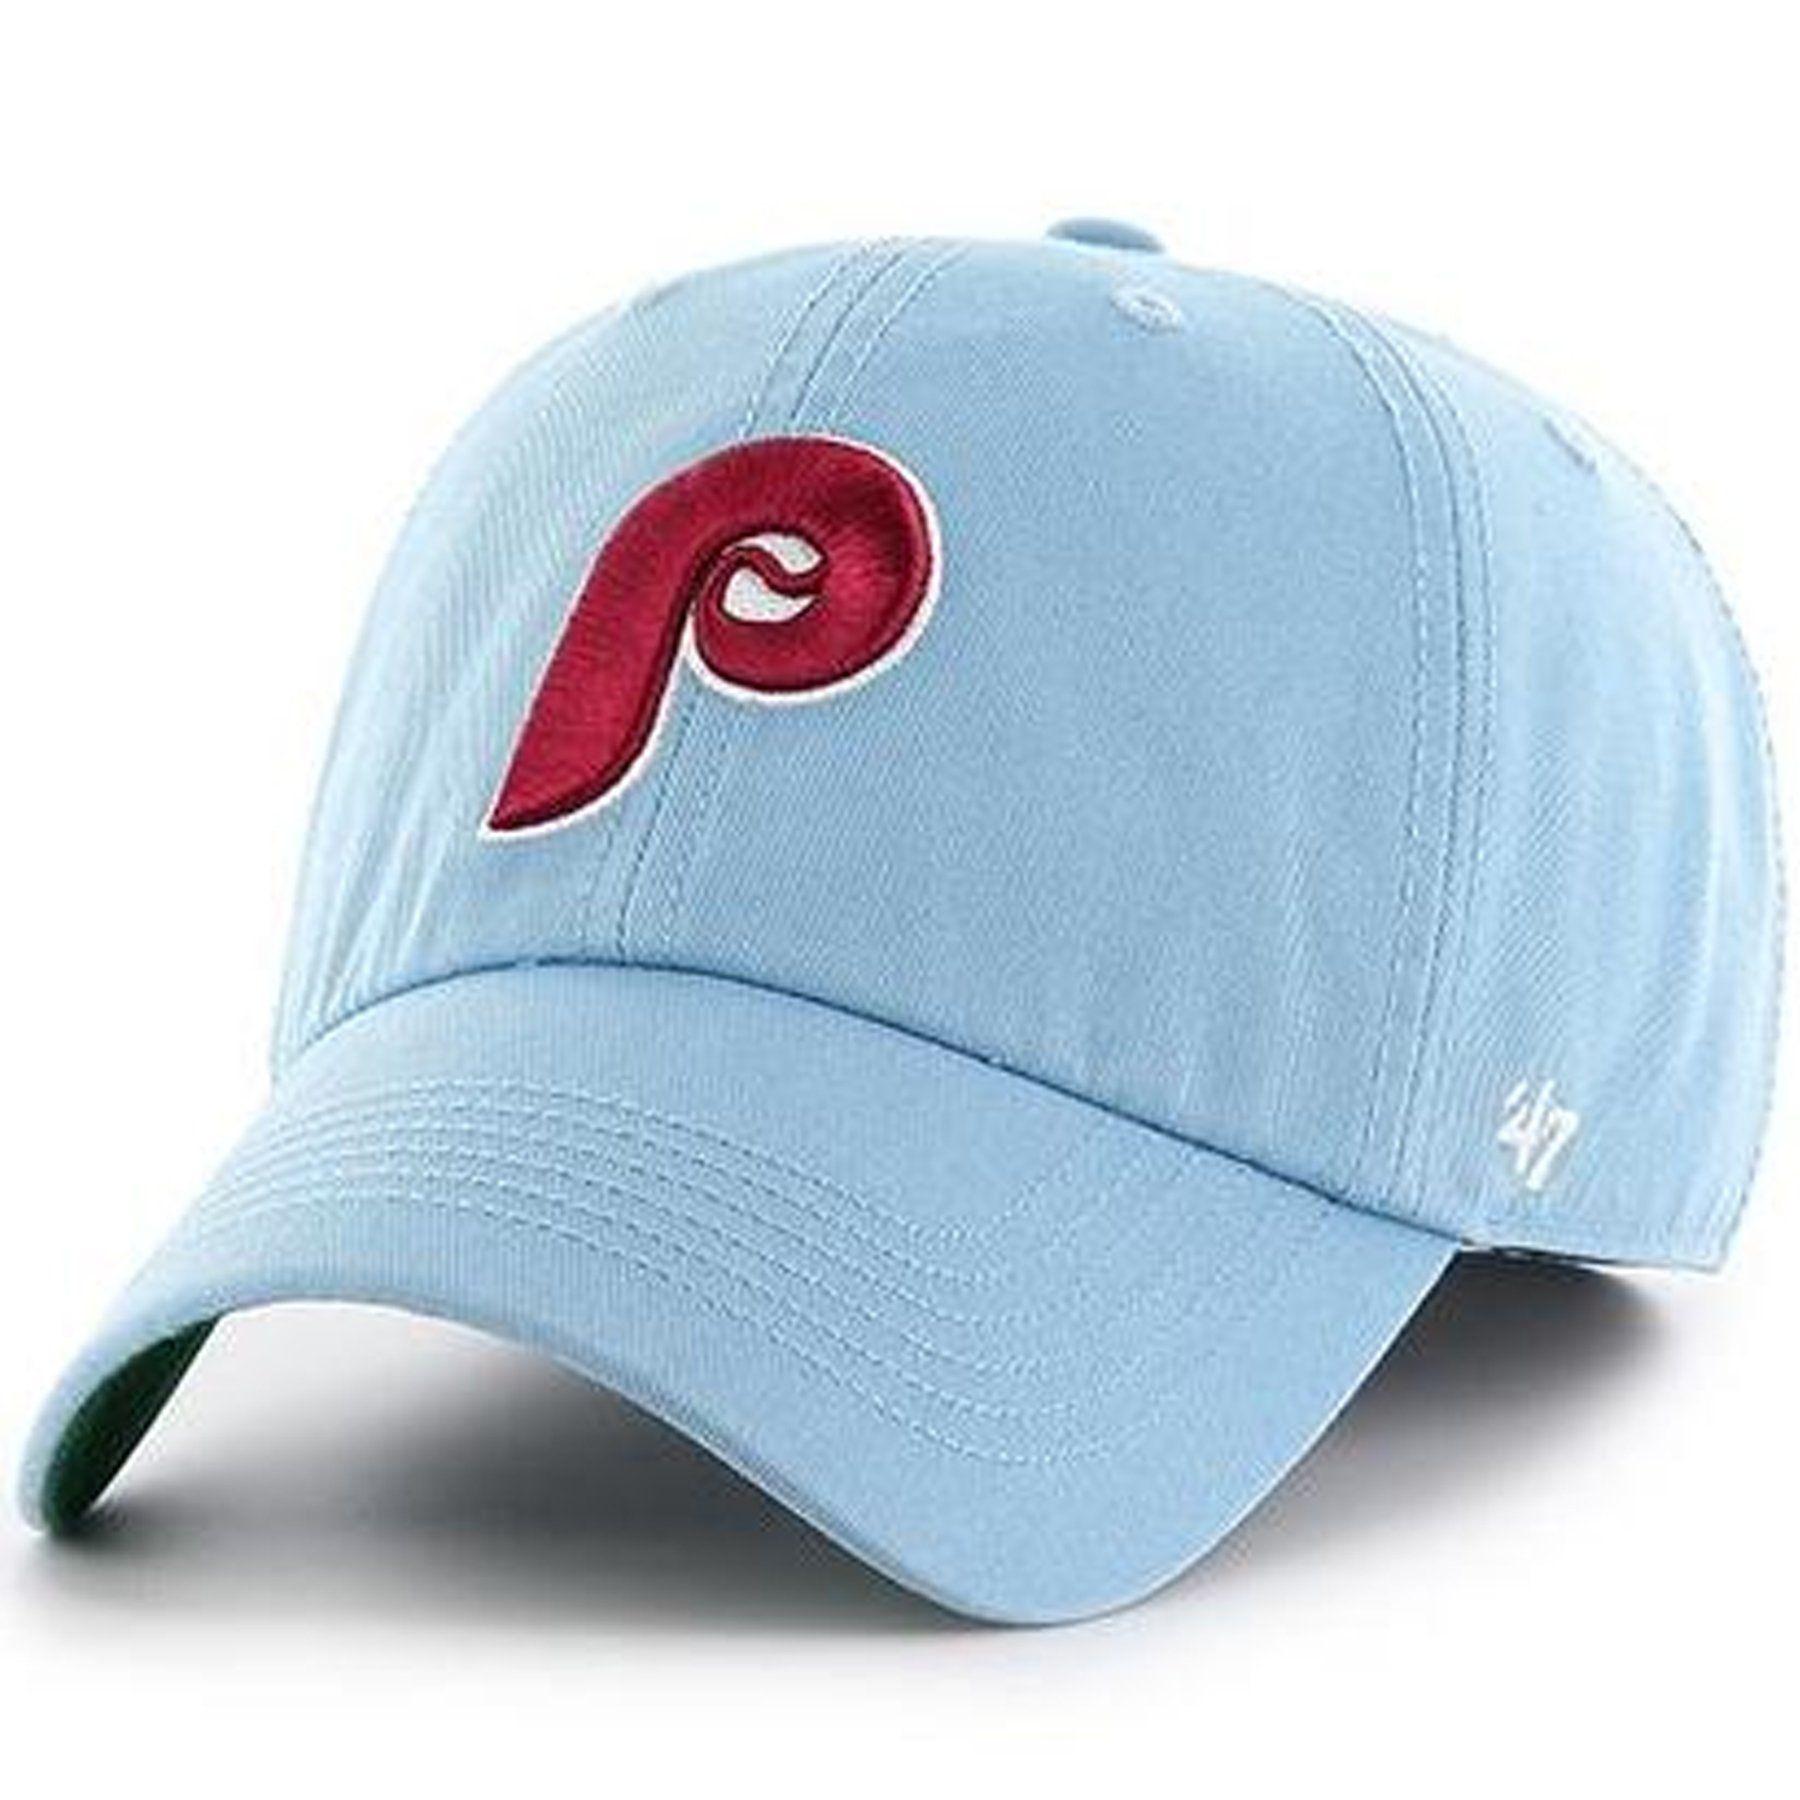 Retro Phillies Logo - Philadelphia Phillies Retro Cooperstown Low Crown Franchise Fitted ...